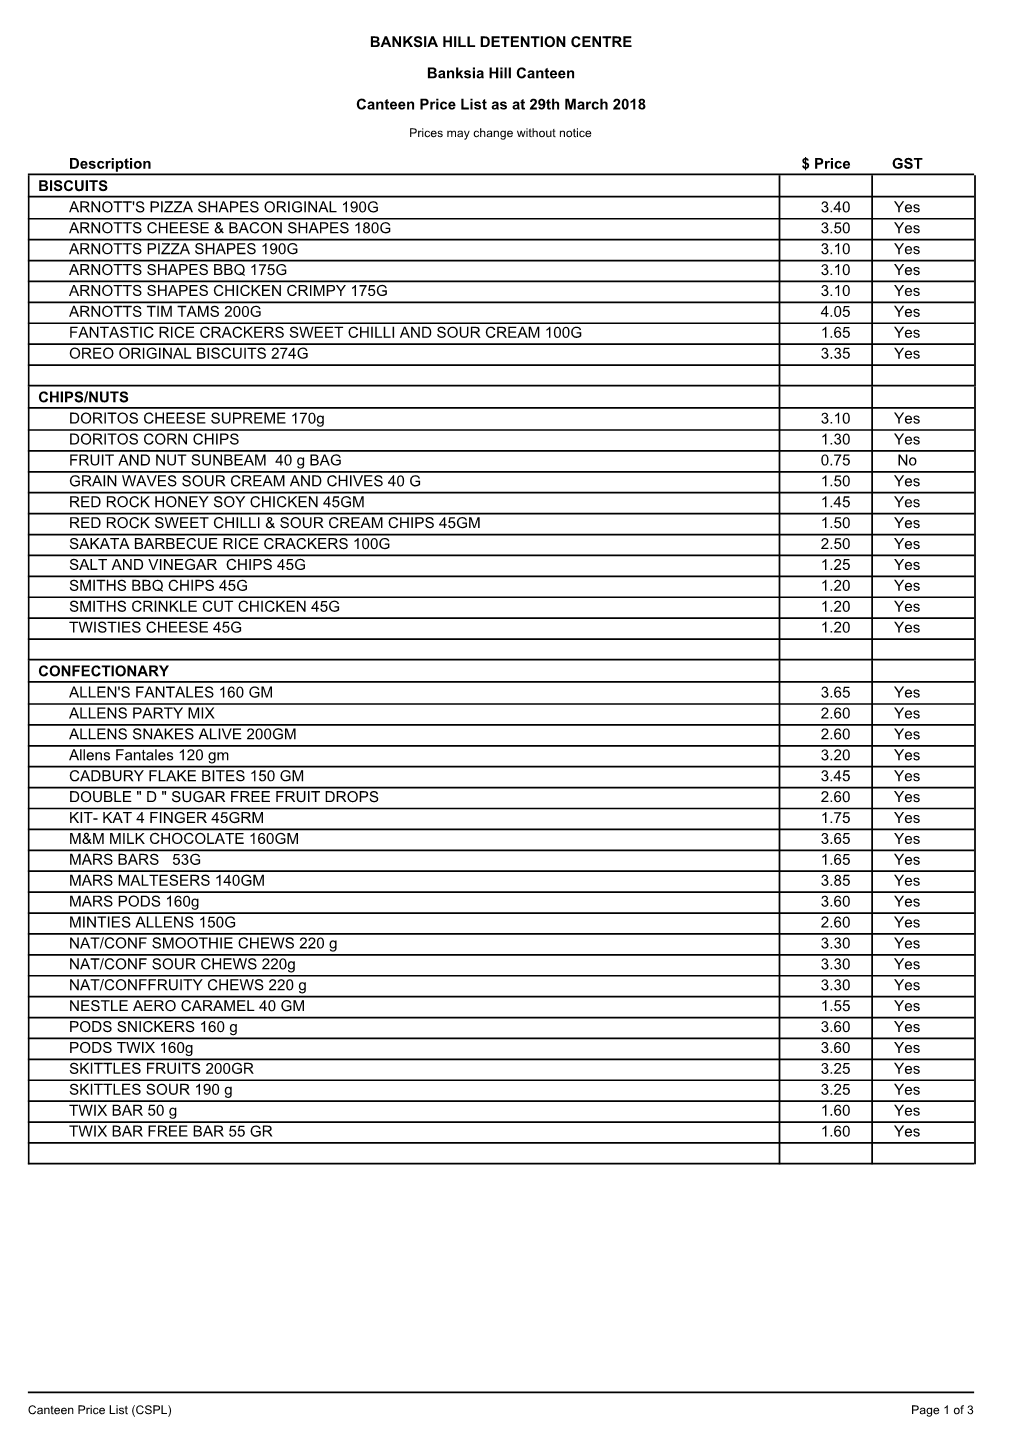 Canteen/Stores Price List